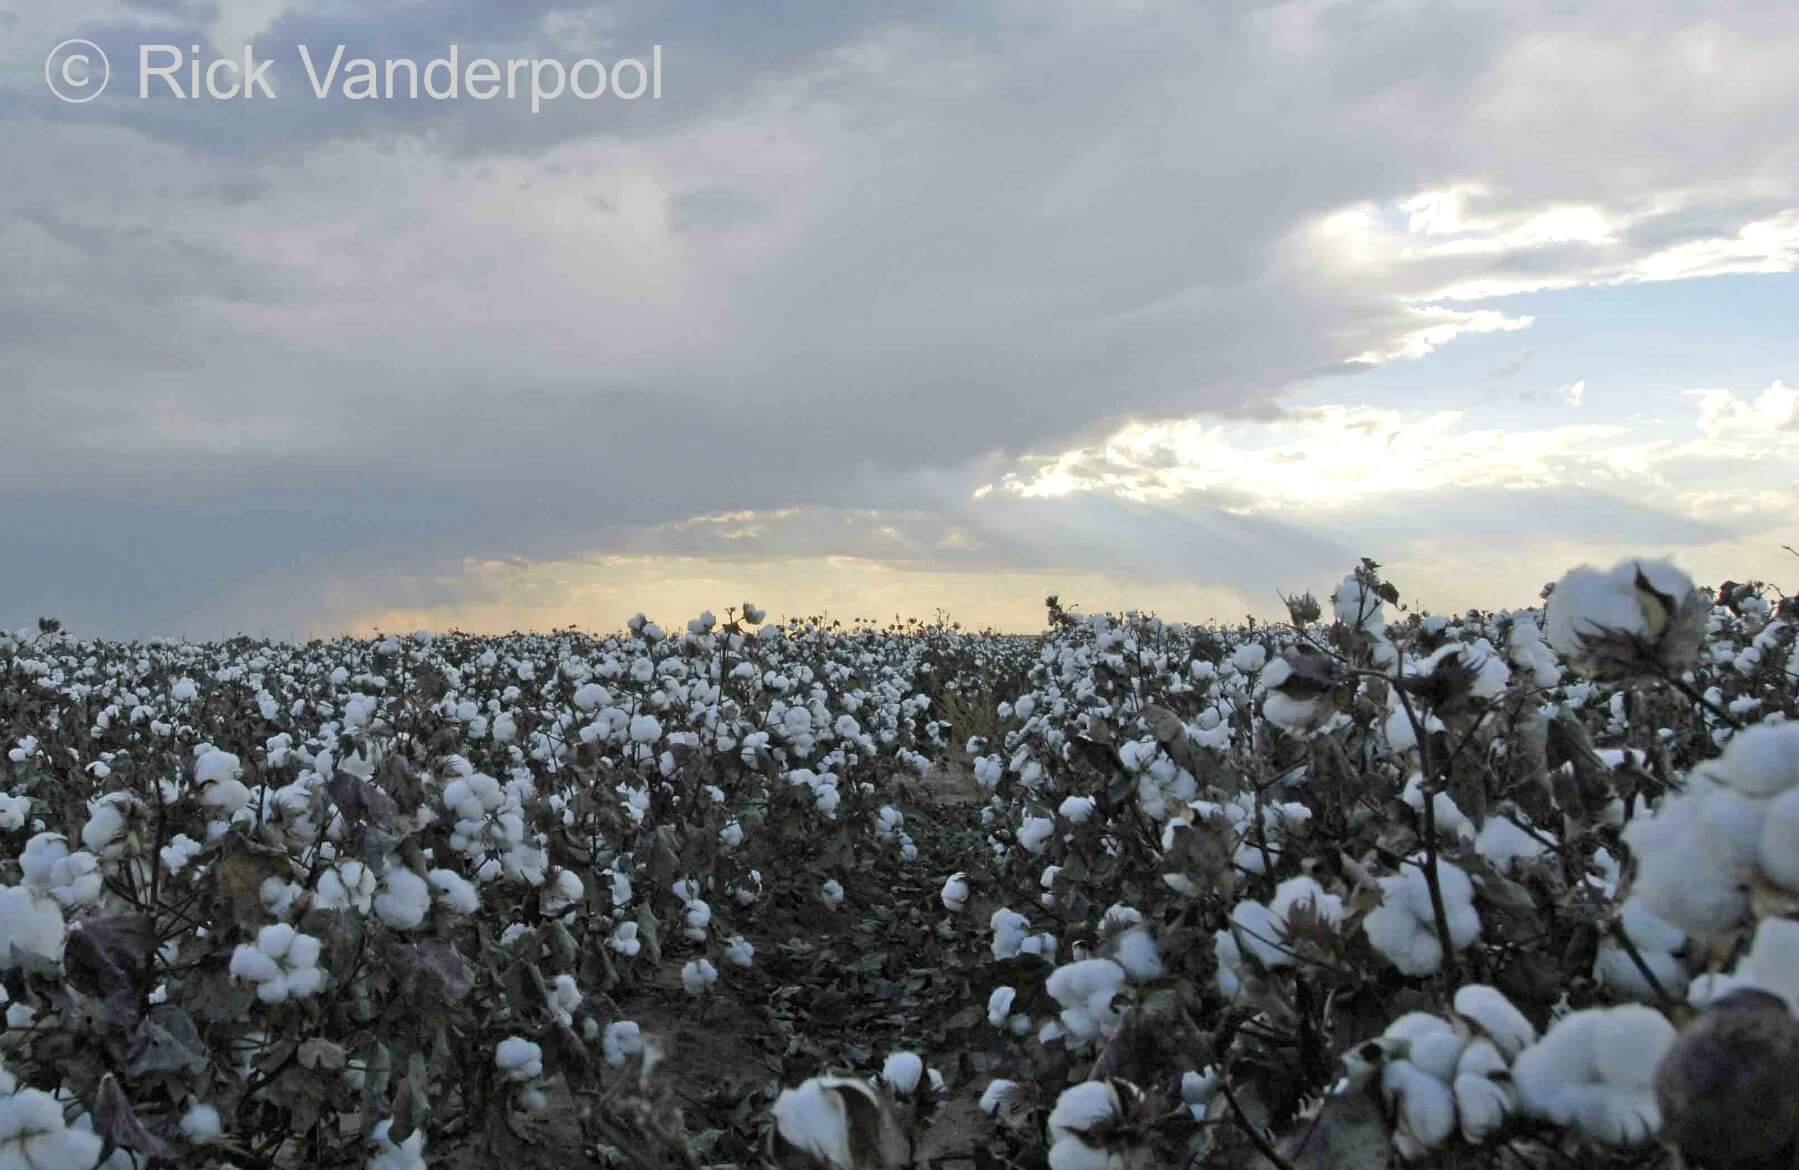 Field of cotton ready for harvest